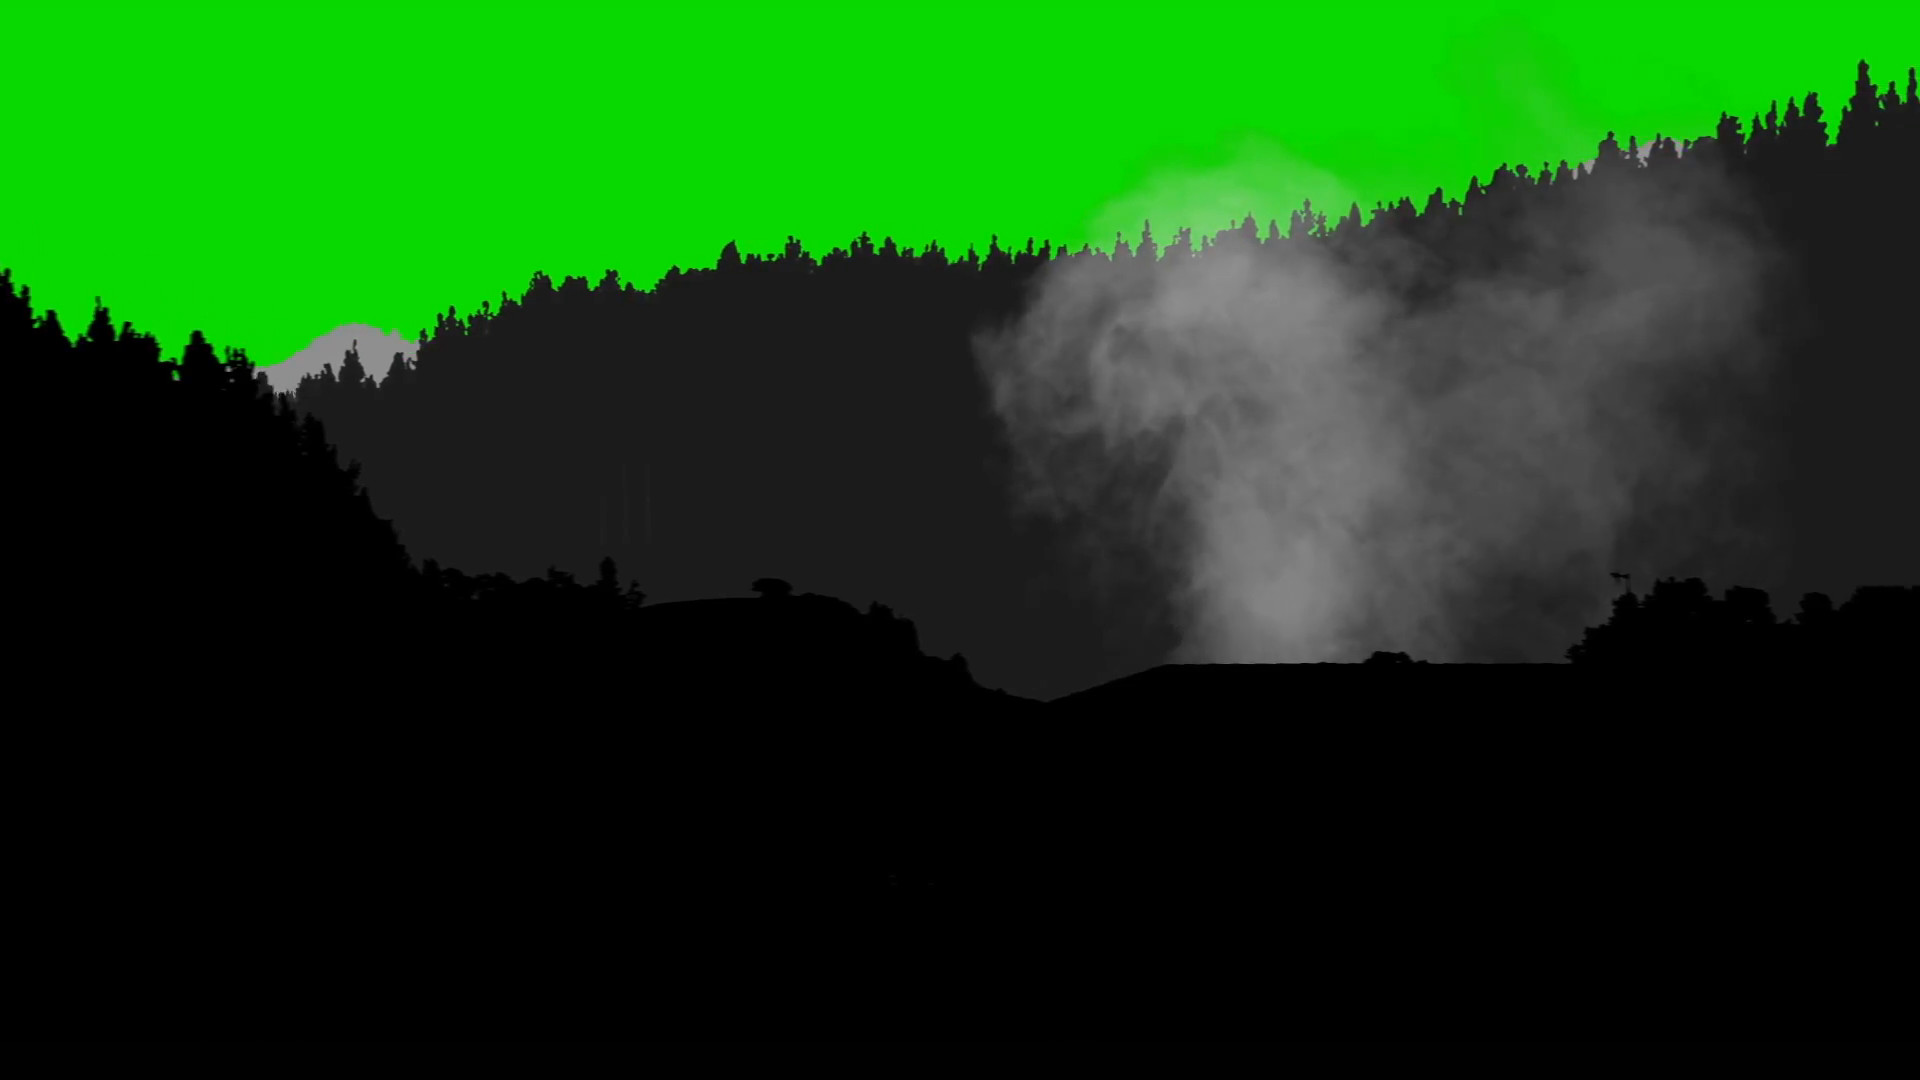 1920x1080 Silhouette Of Forest Hills Cats and Smoke on a Green Screen Background  Motion Background - VideoBlocks